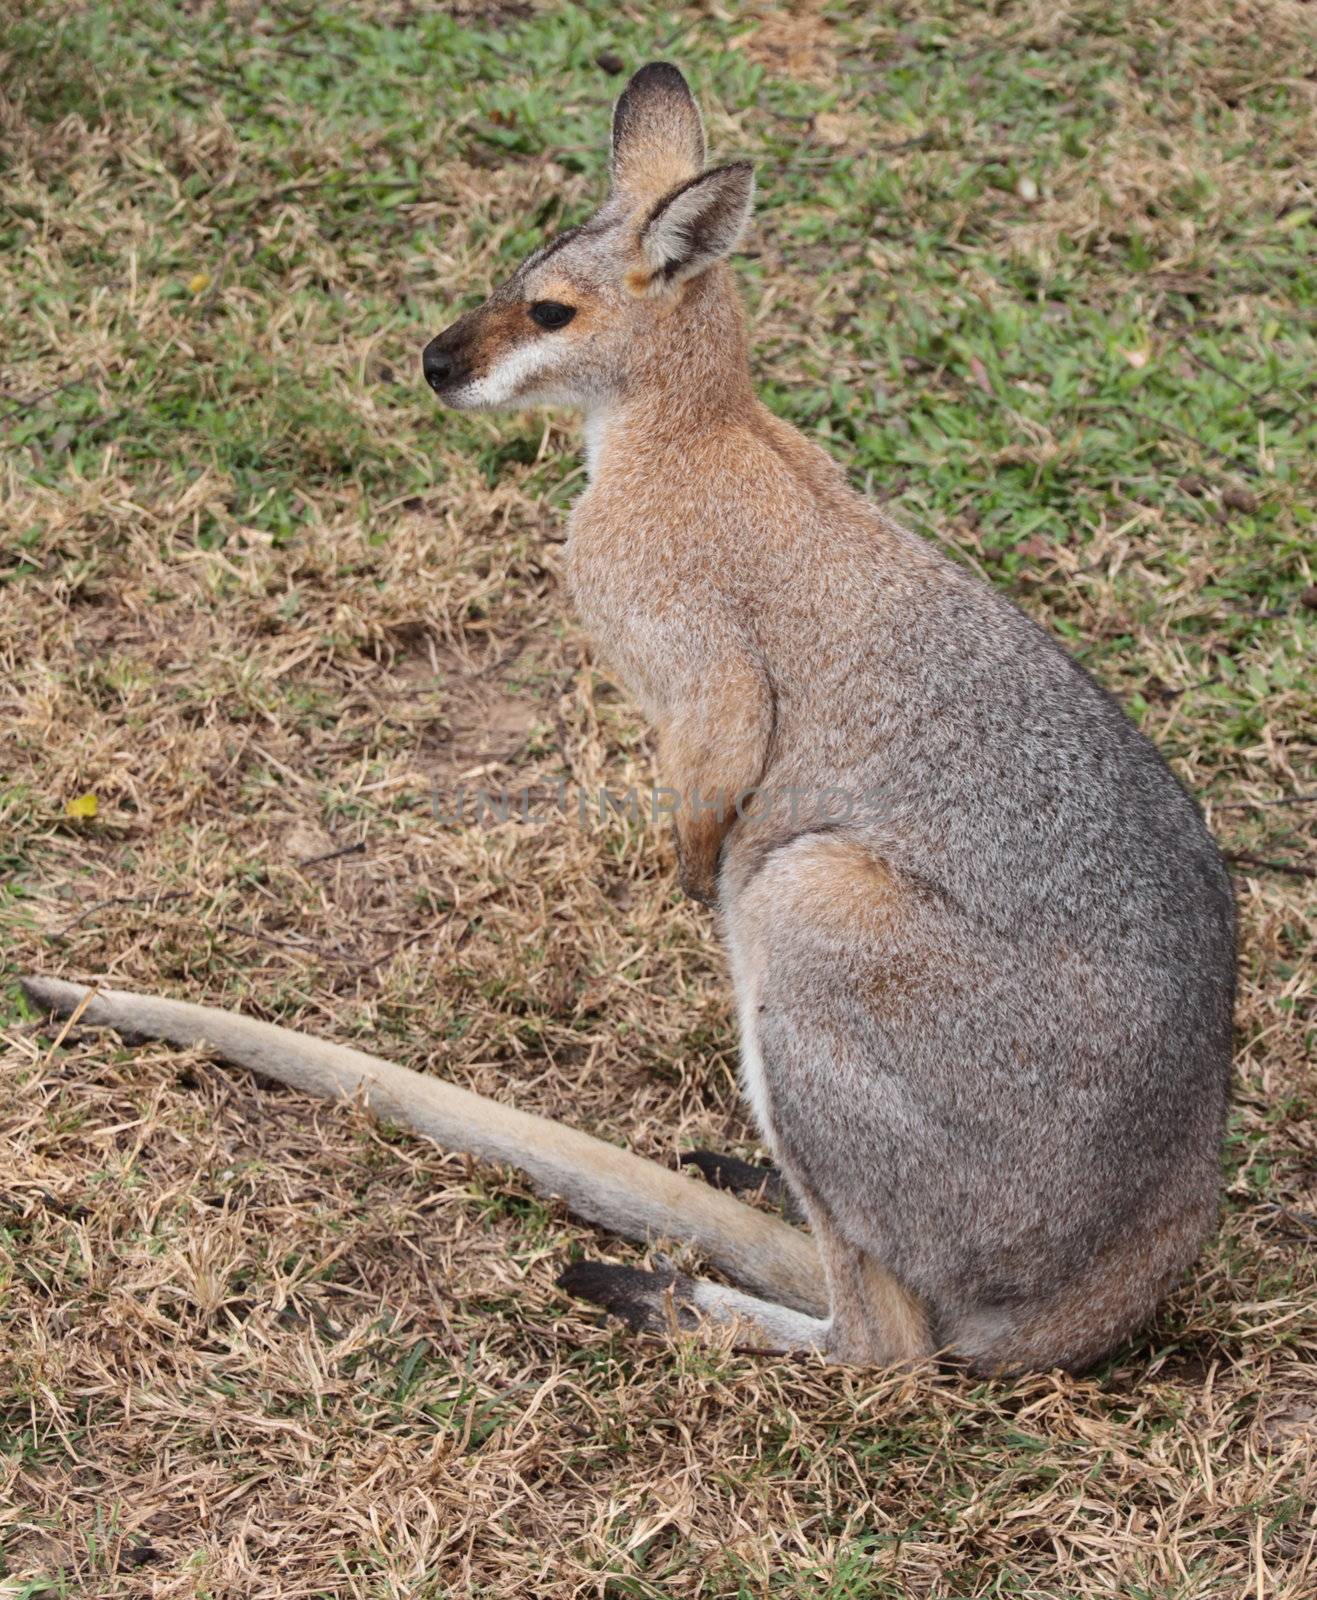 Full body side profile of a small Australian Wallaby sitting on the ground